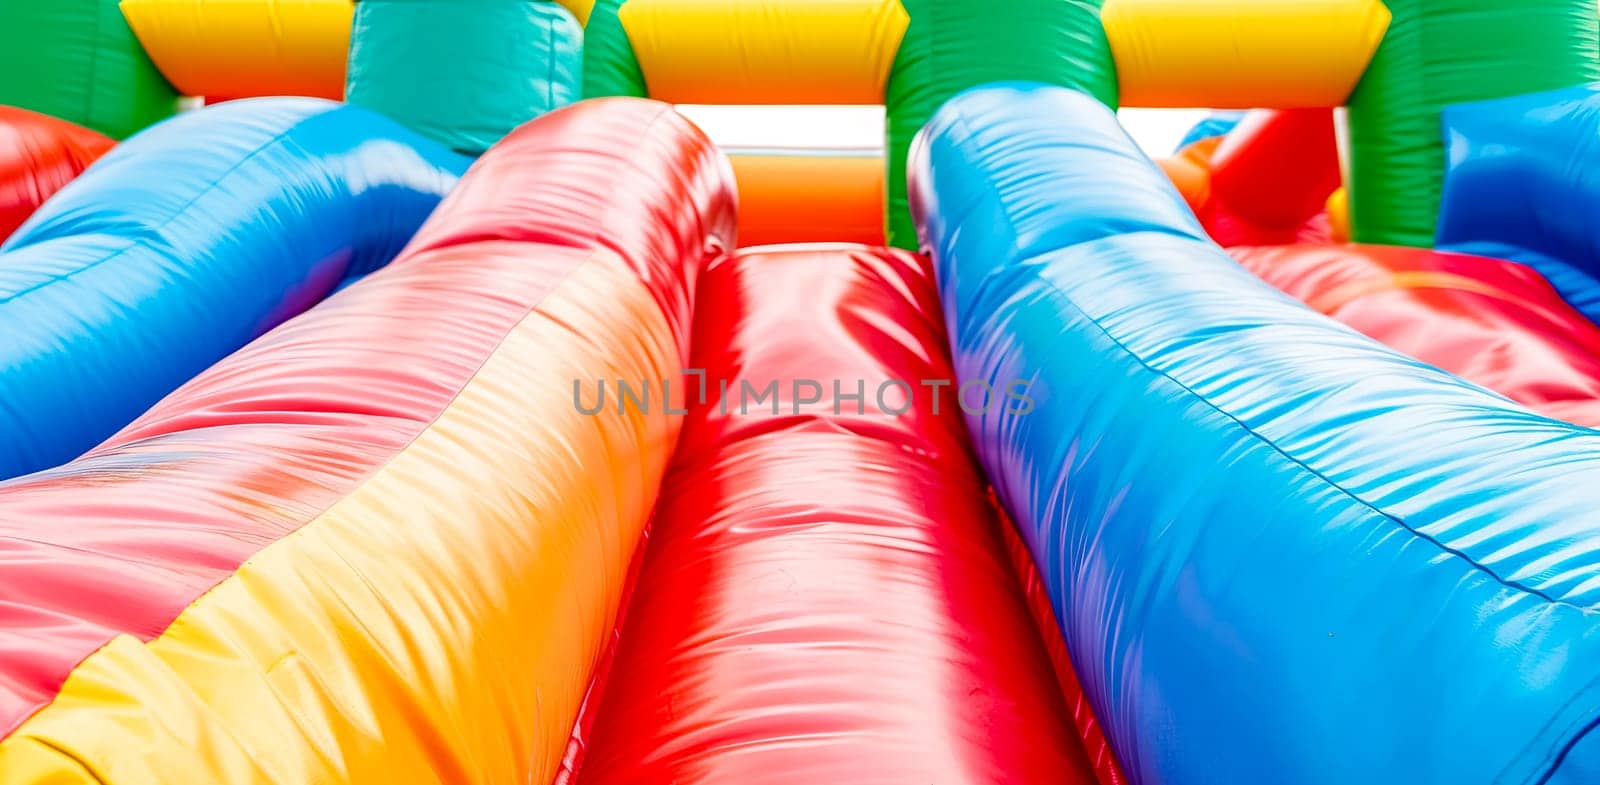 Colorful Inflatable Playground Structure for Kids' Entertainment and Outdoor Fun.